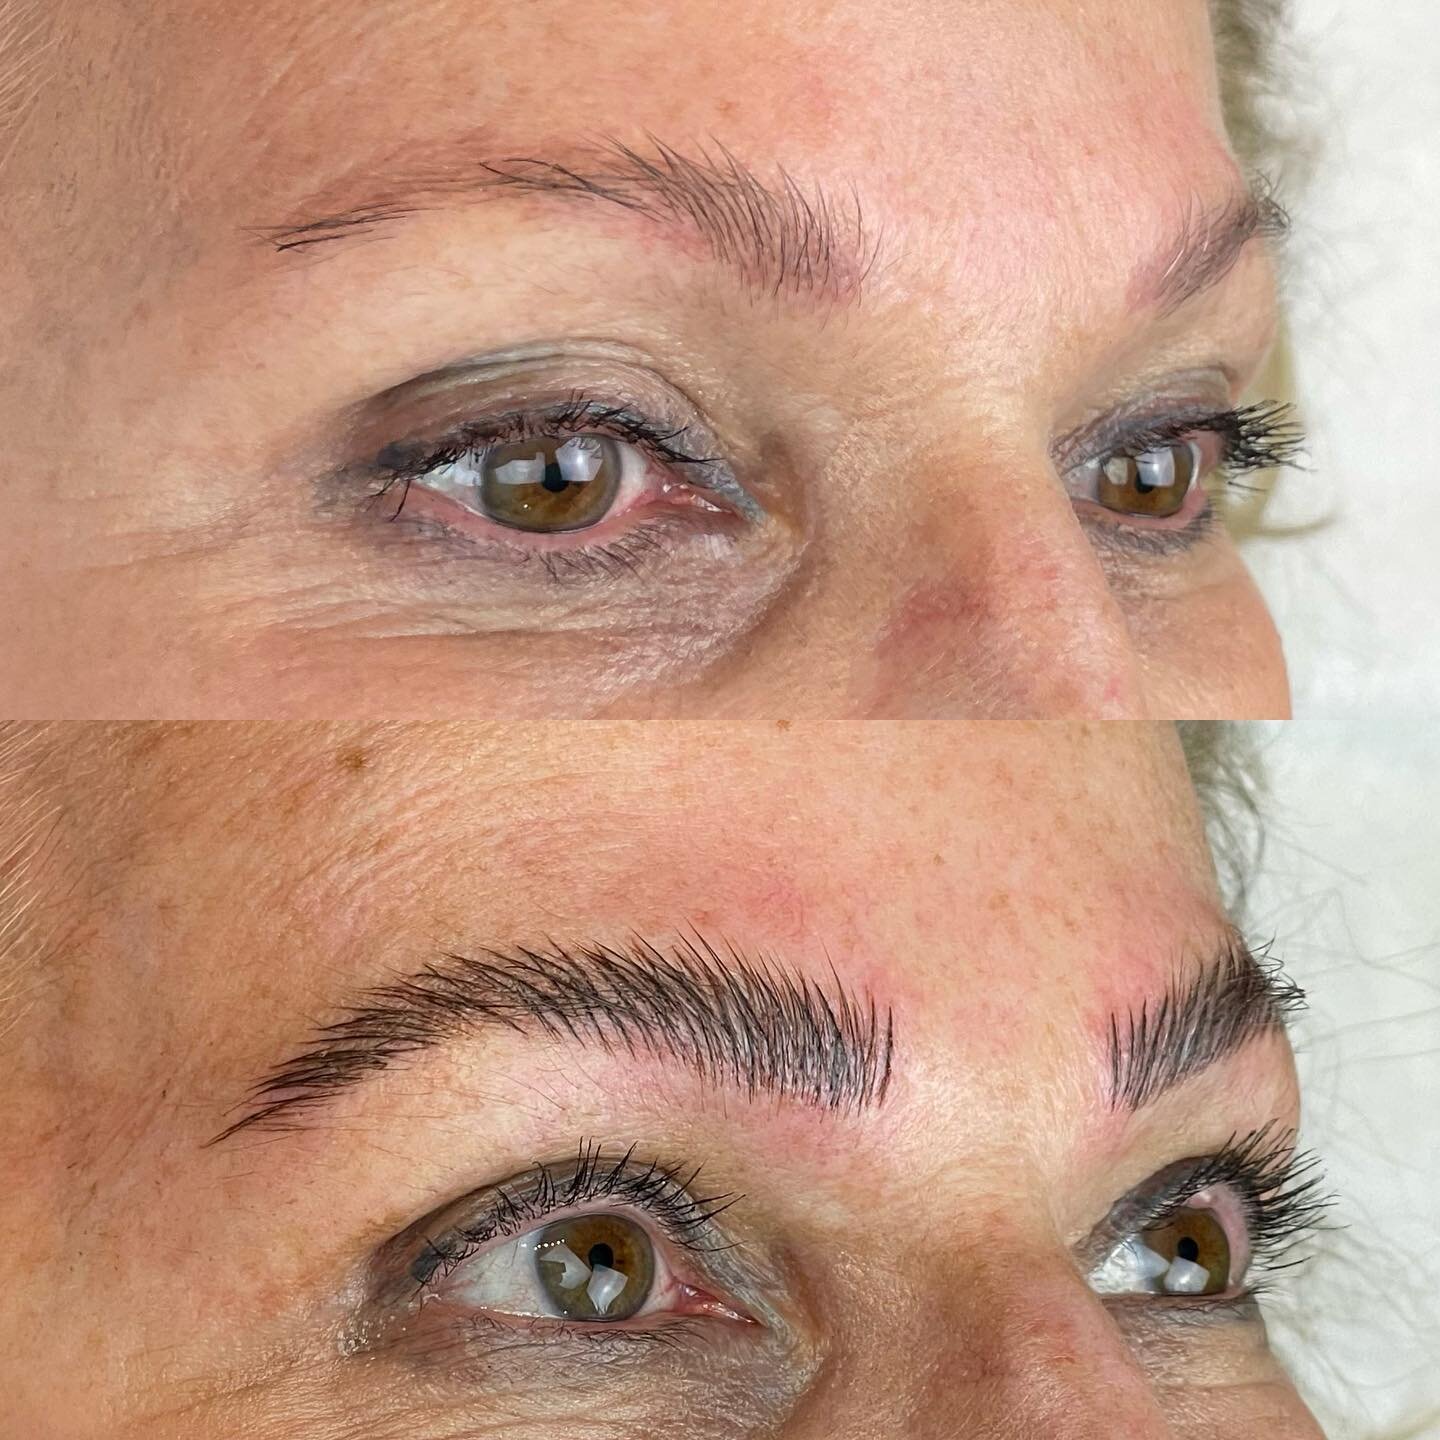 Free hand corrective microblading is my fav! 

Check out these before and afters! Client wanted a lifted laminated look &hellip; and we delivered! 💥❤️

August appointments available 
BOOK NOW 
Link in bio: 
www.kacierainey.com

#pmu #microblading #m